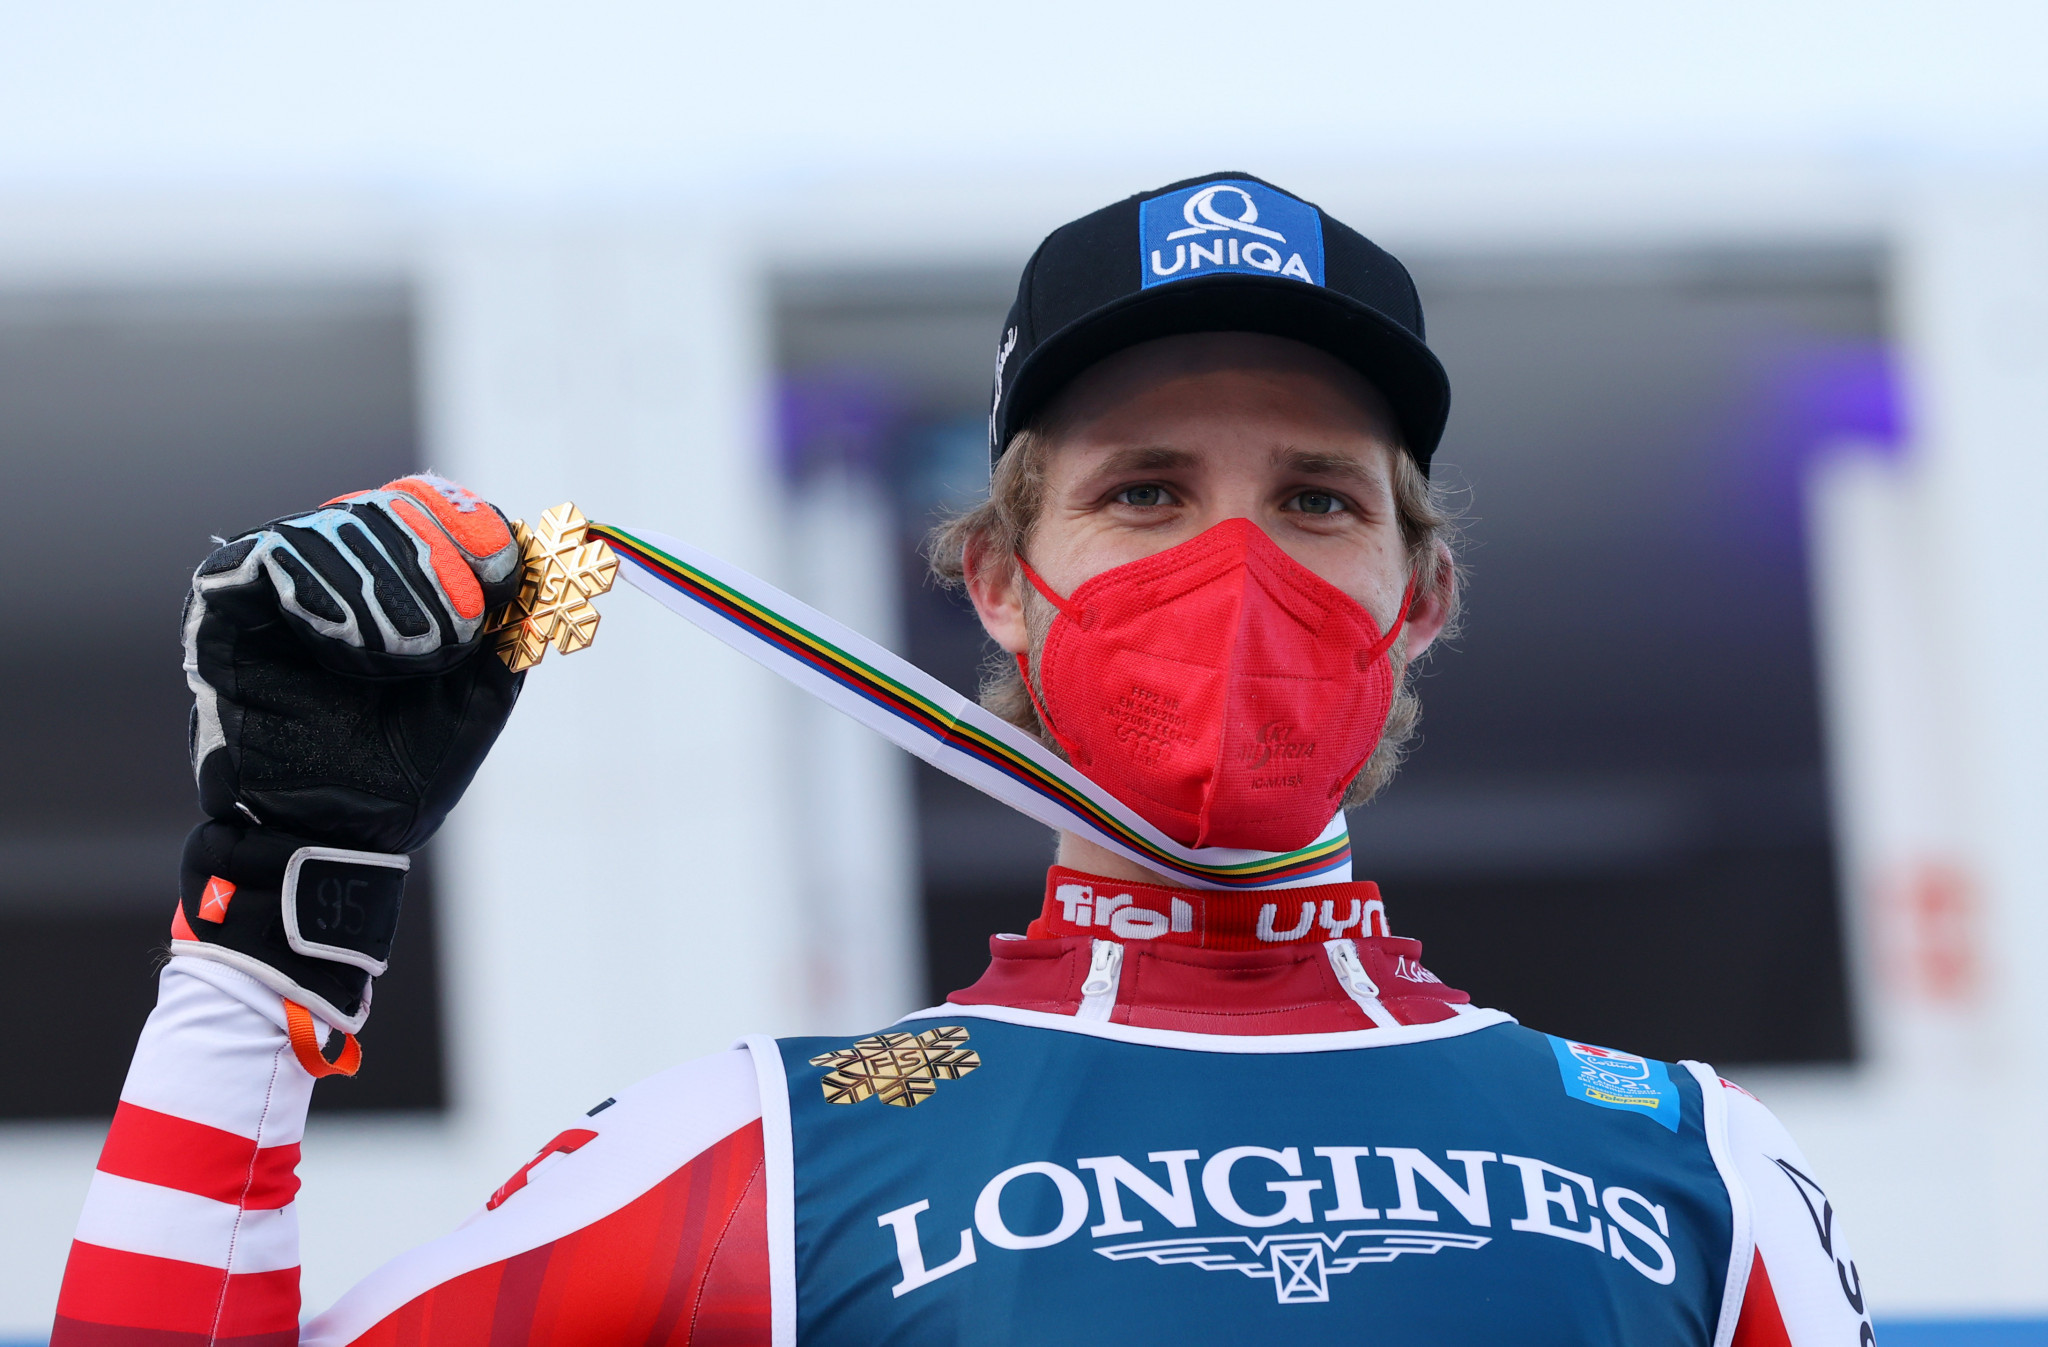 Marco Schwarz became a world champion in Alpine combined earlier this year ©Getty Images